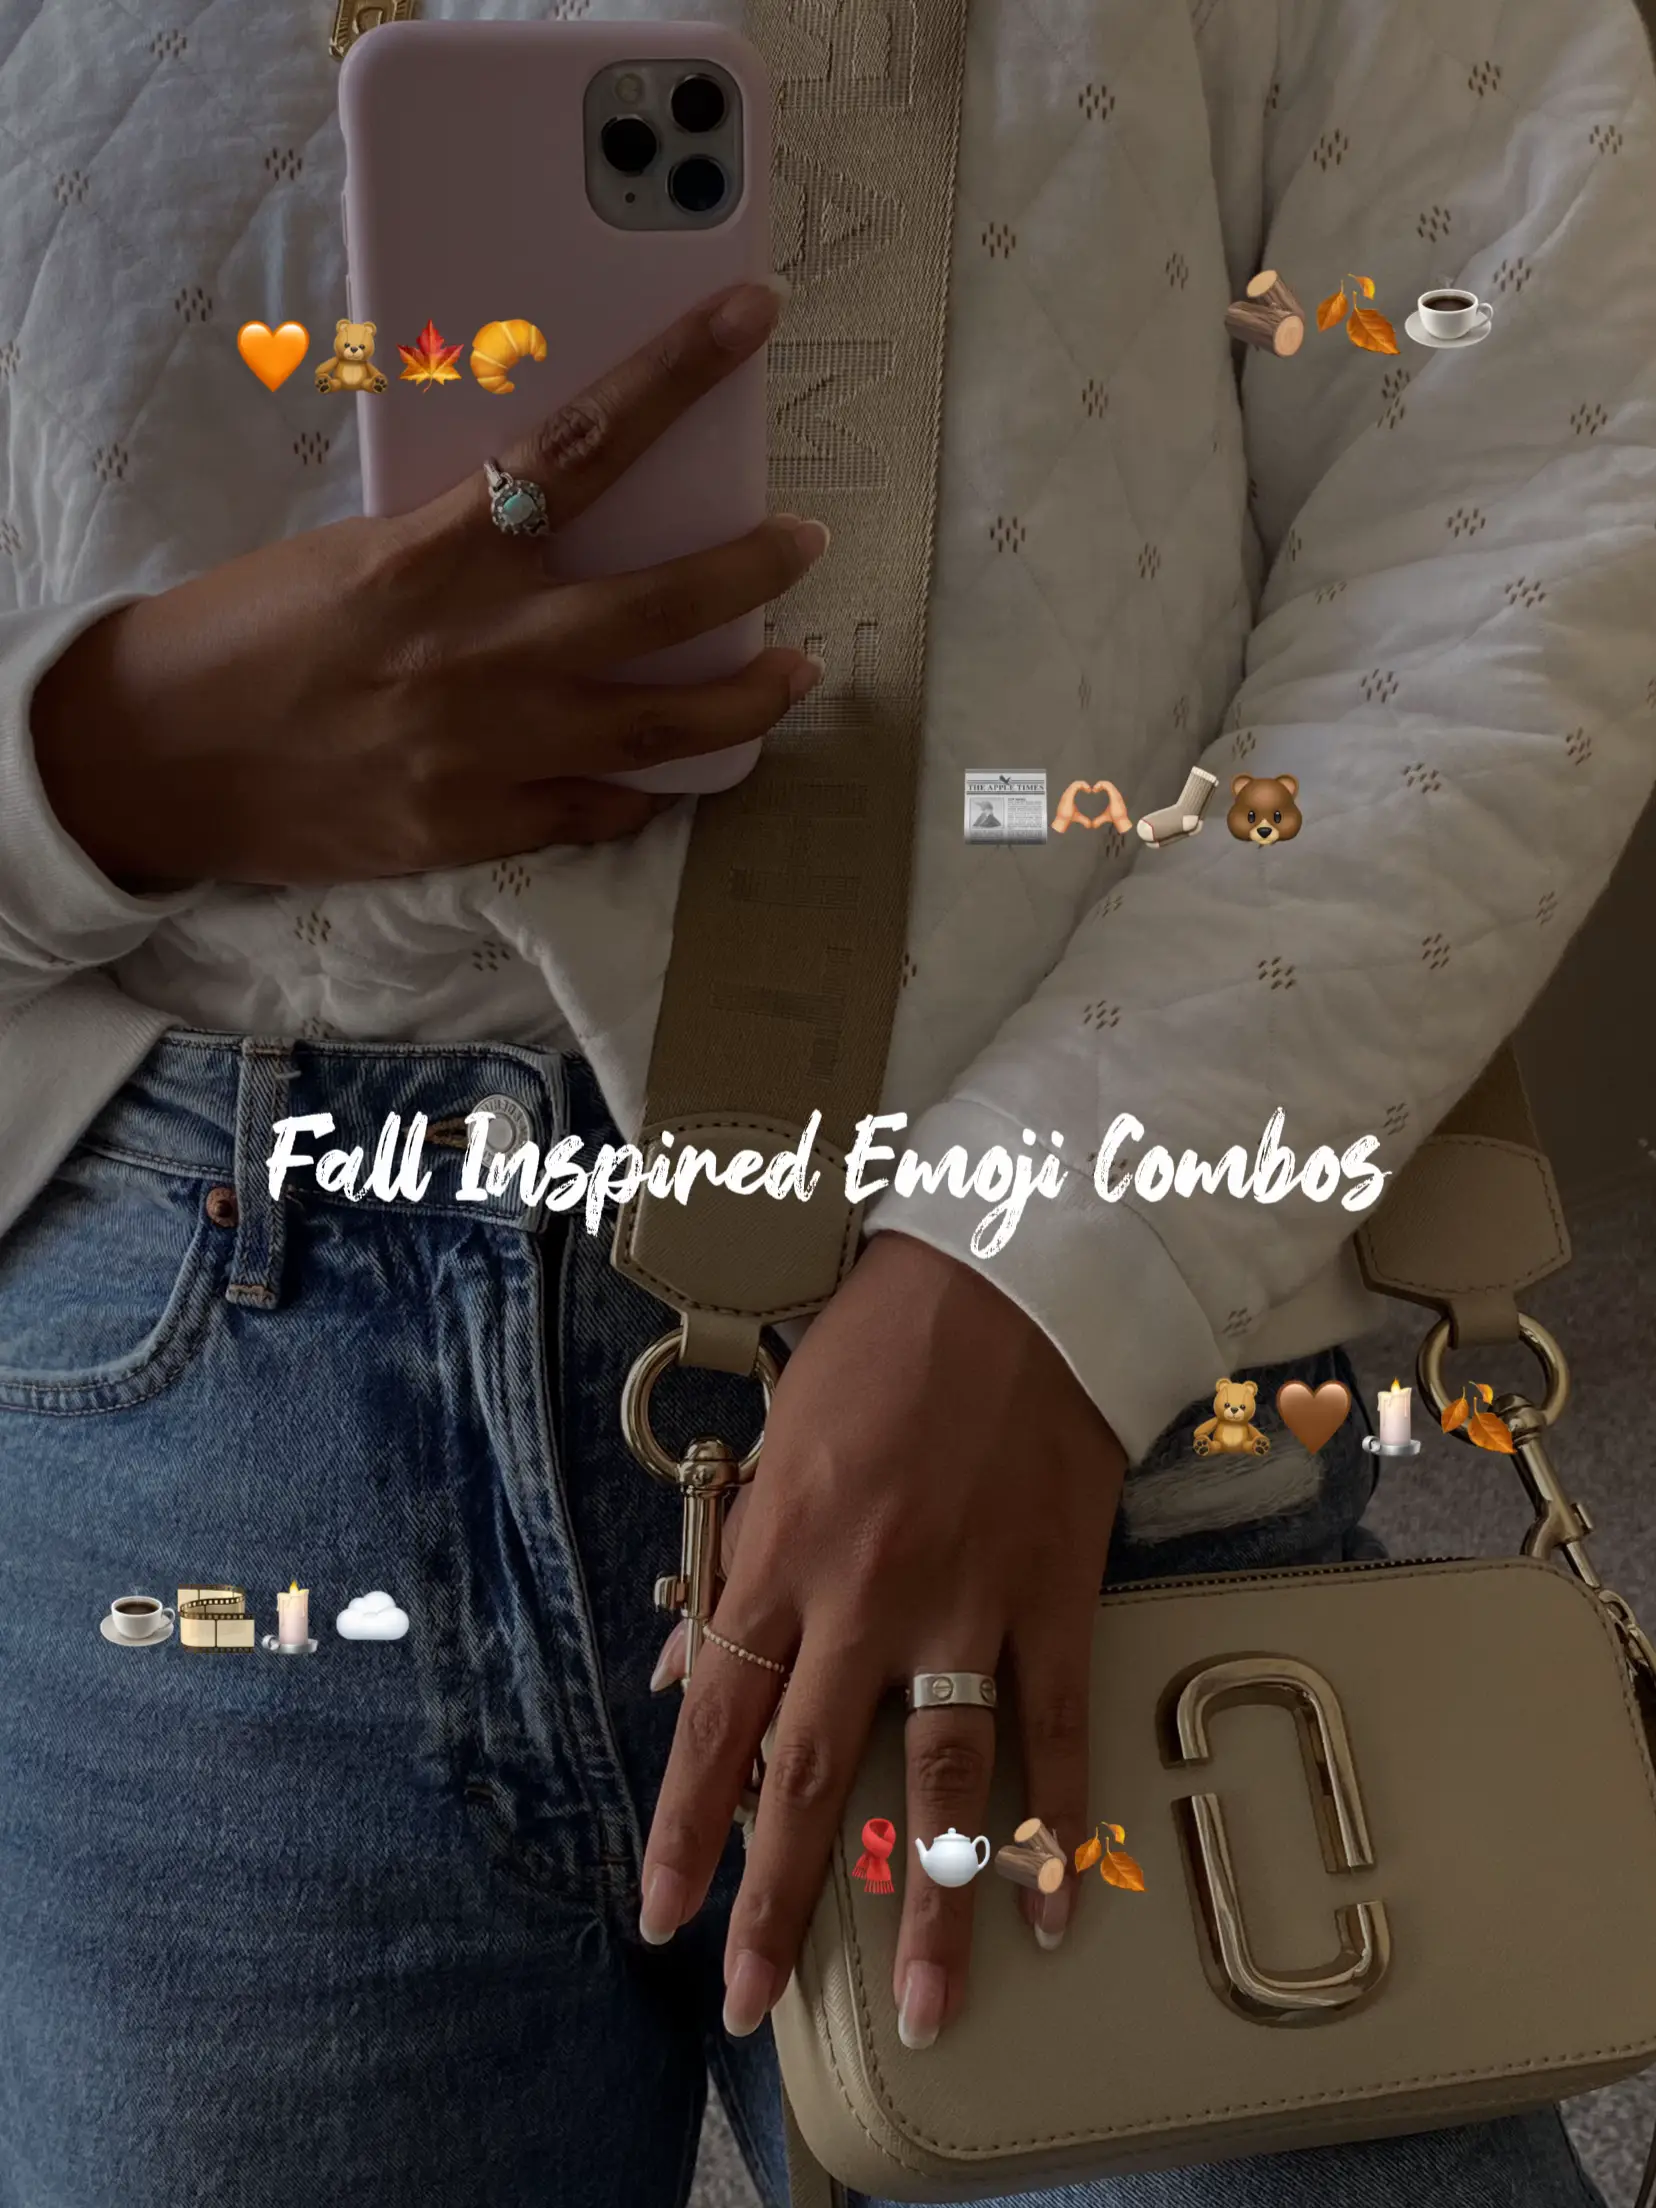 Fall Inspired Emoji Combos's images